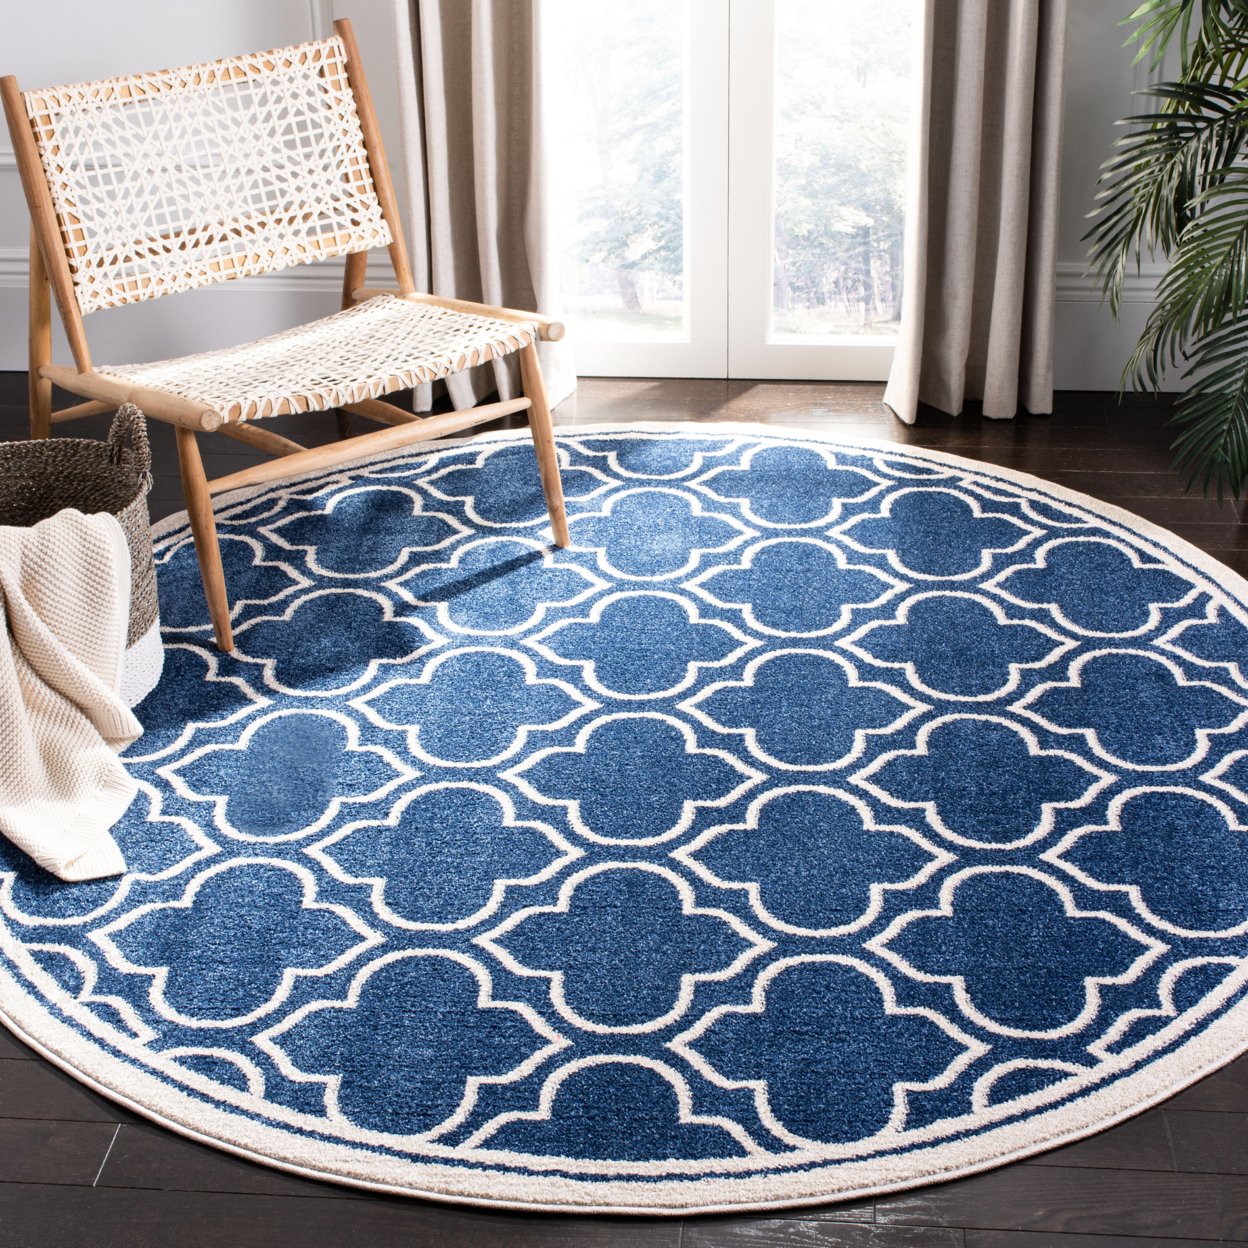 SAFAVIEH Amherst Collection AMT412P Navy / Ivory Rug - 3' X 5'